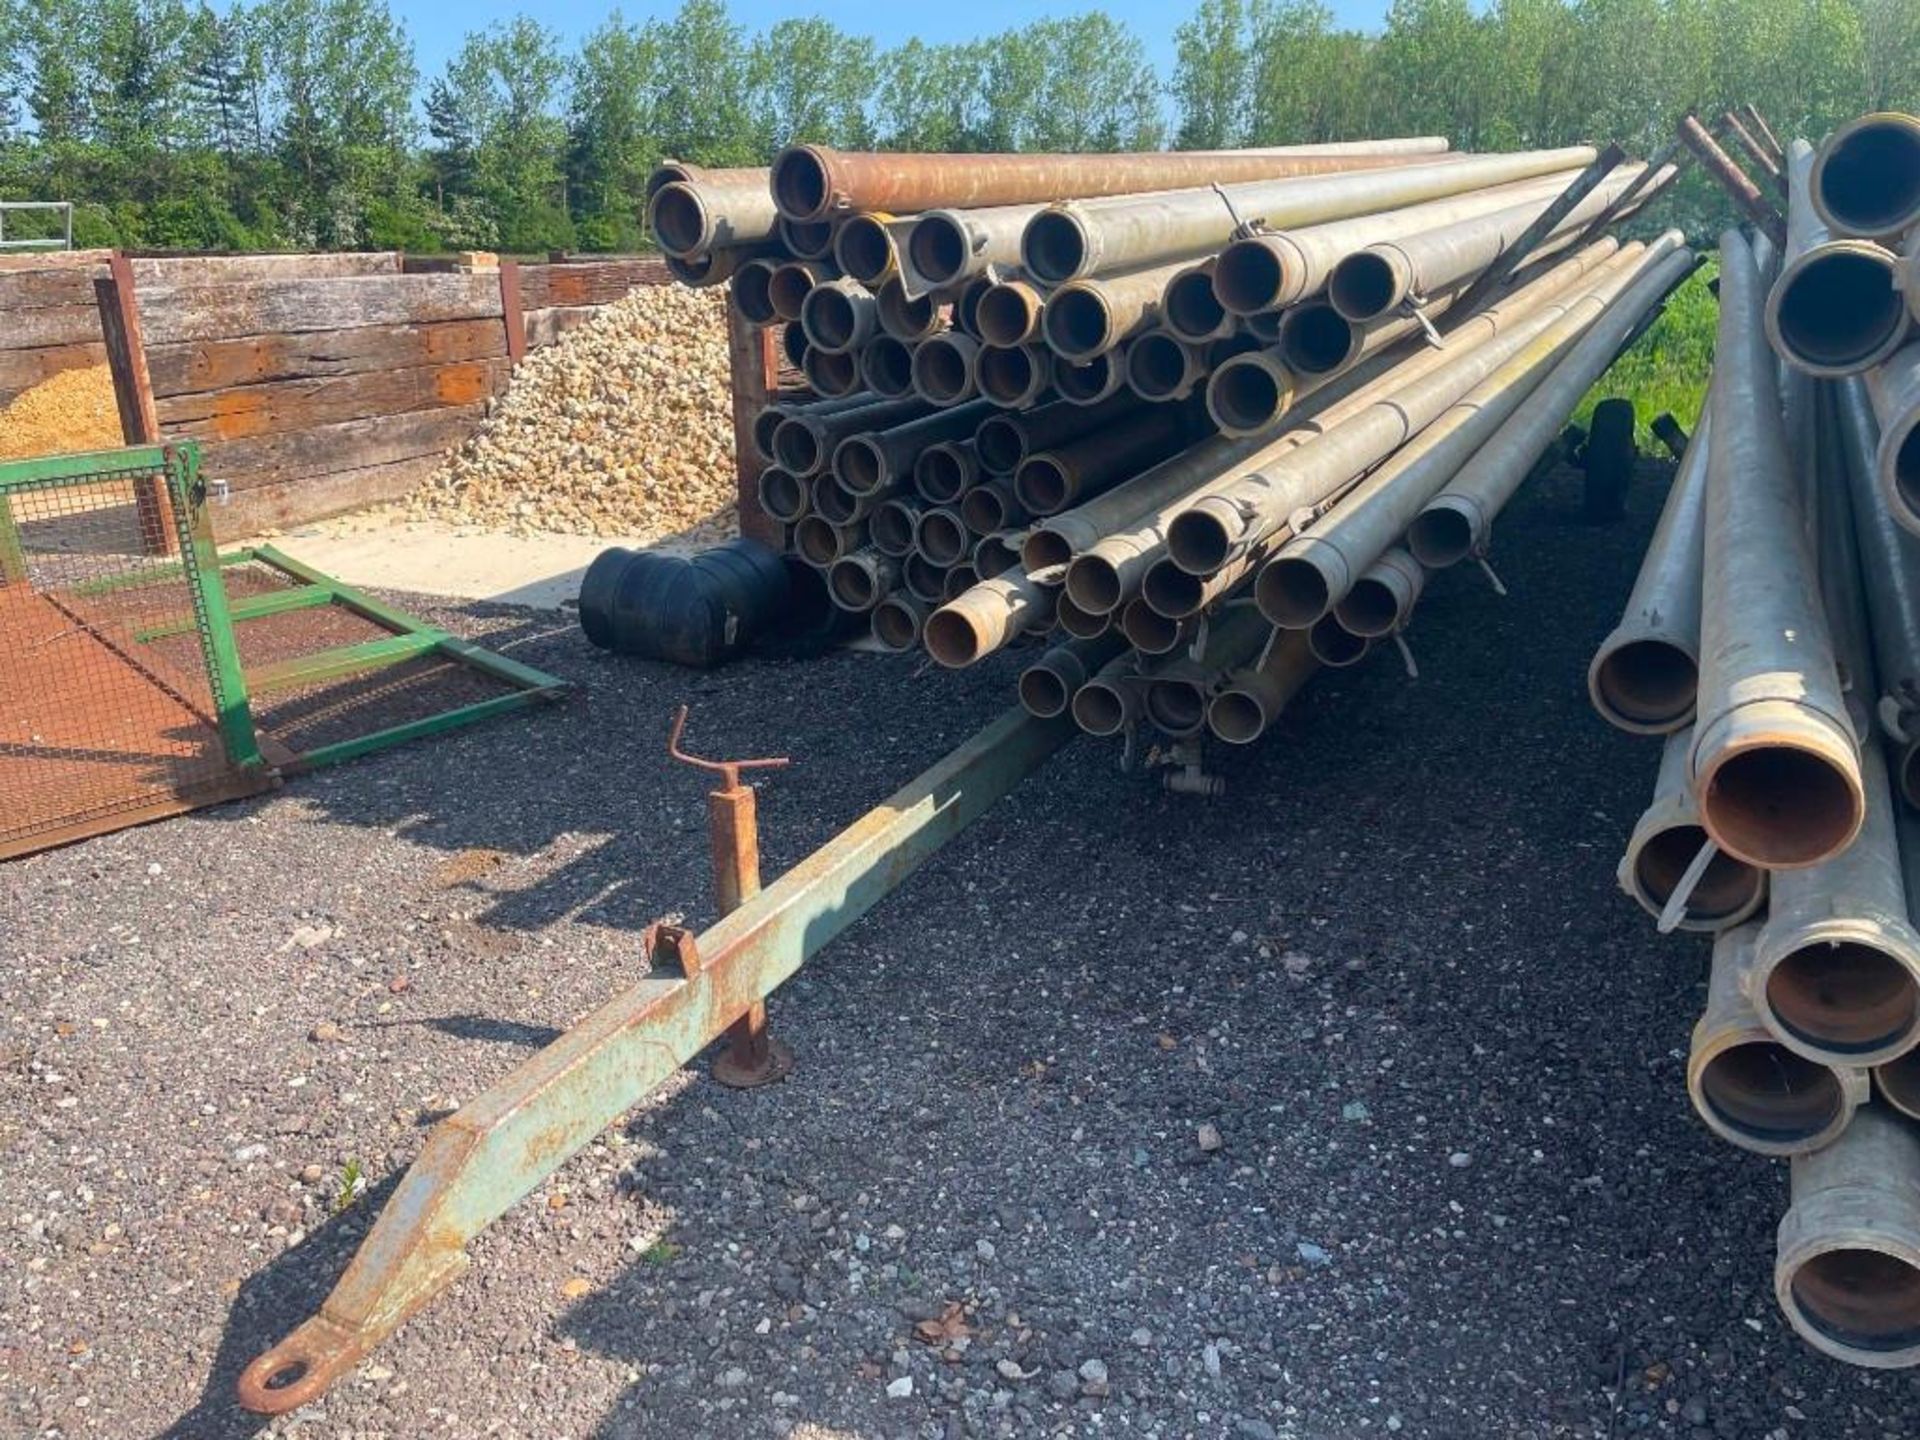 65No. 5" Farrows of Spalding Wright Rain Irrigation Pipes c/w Pipe Trailer